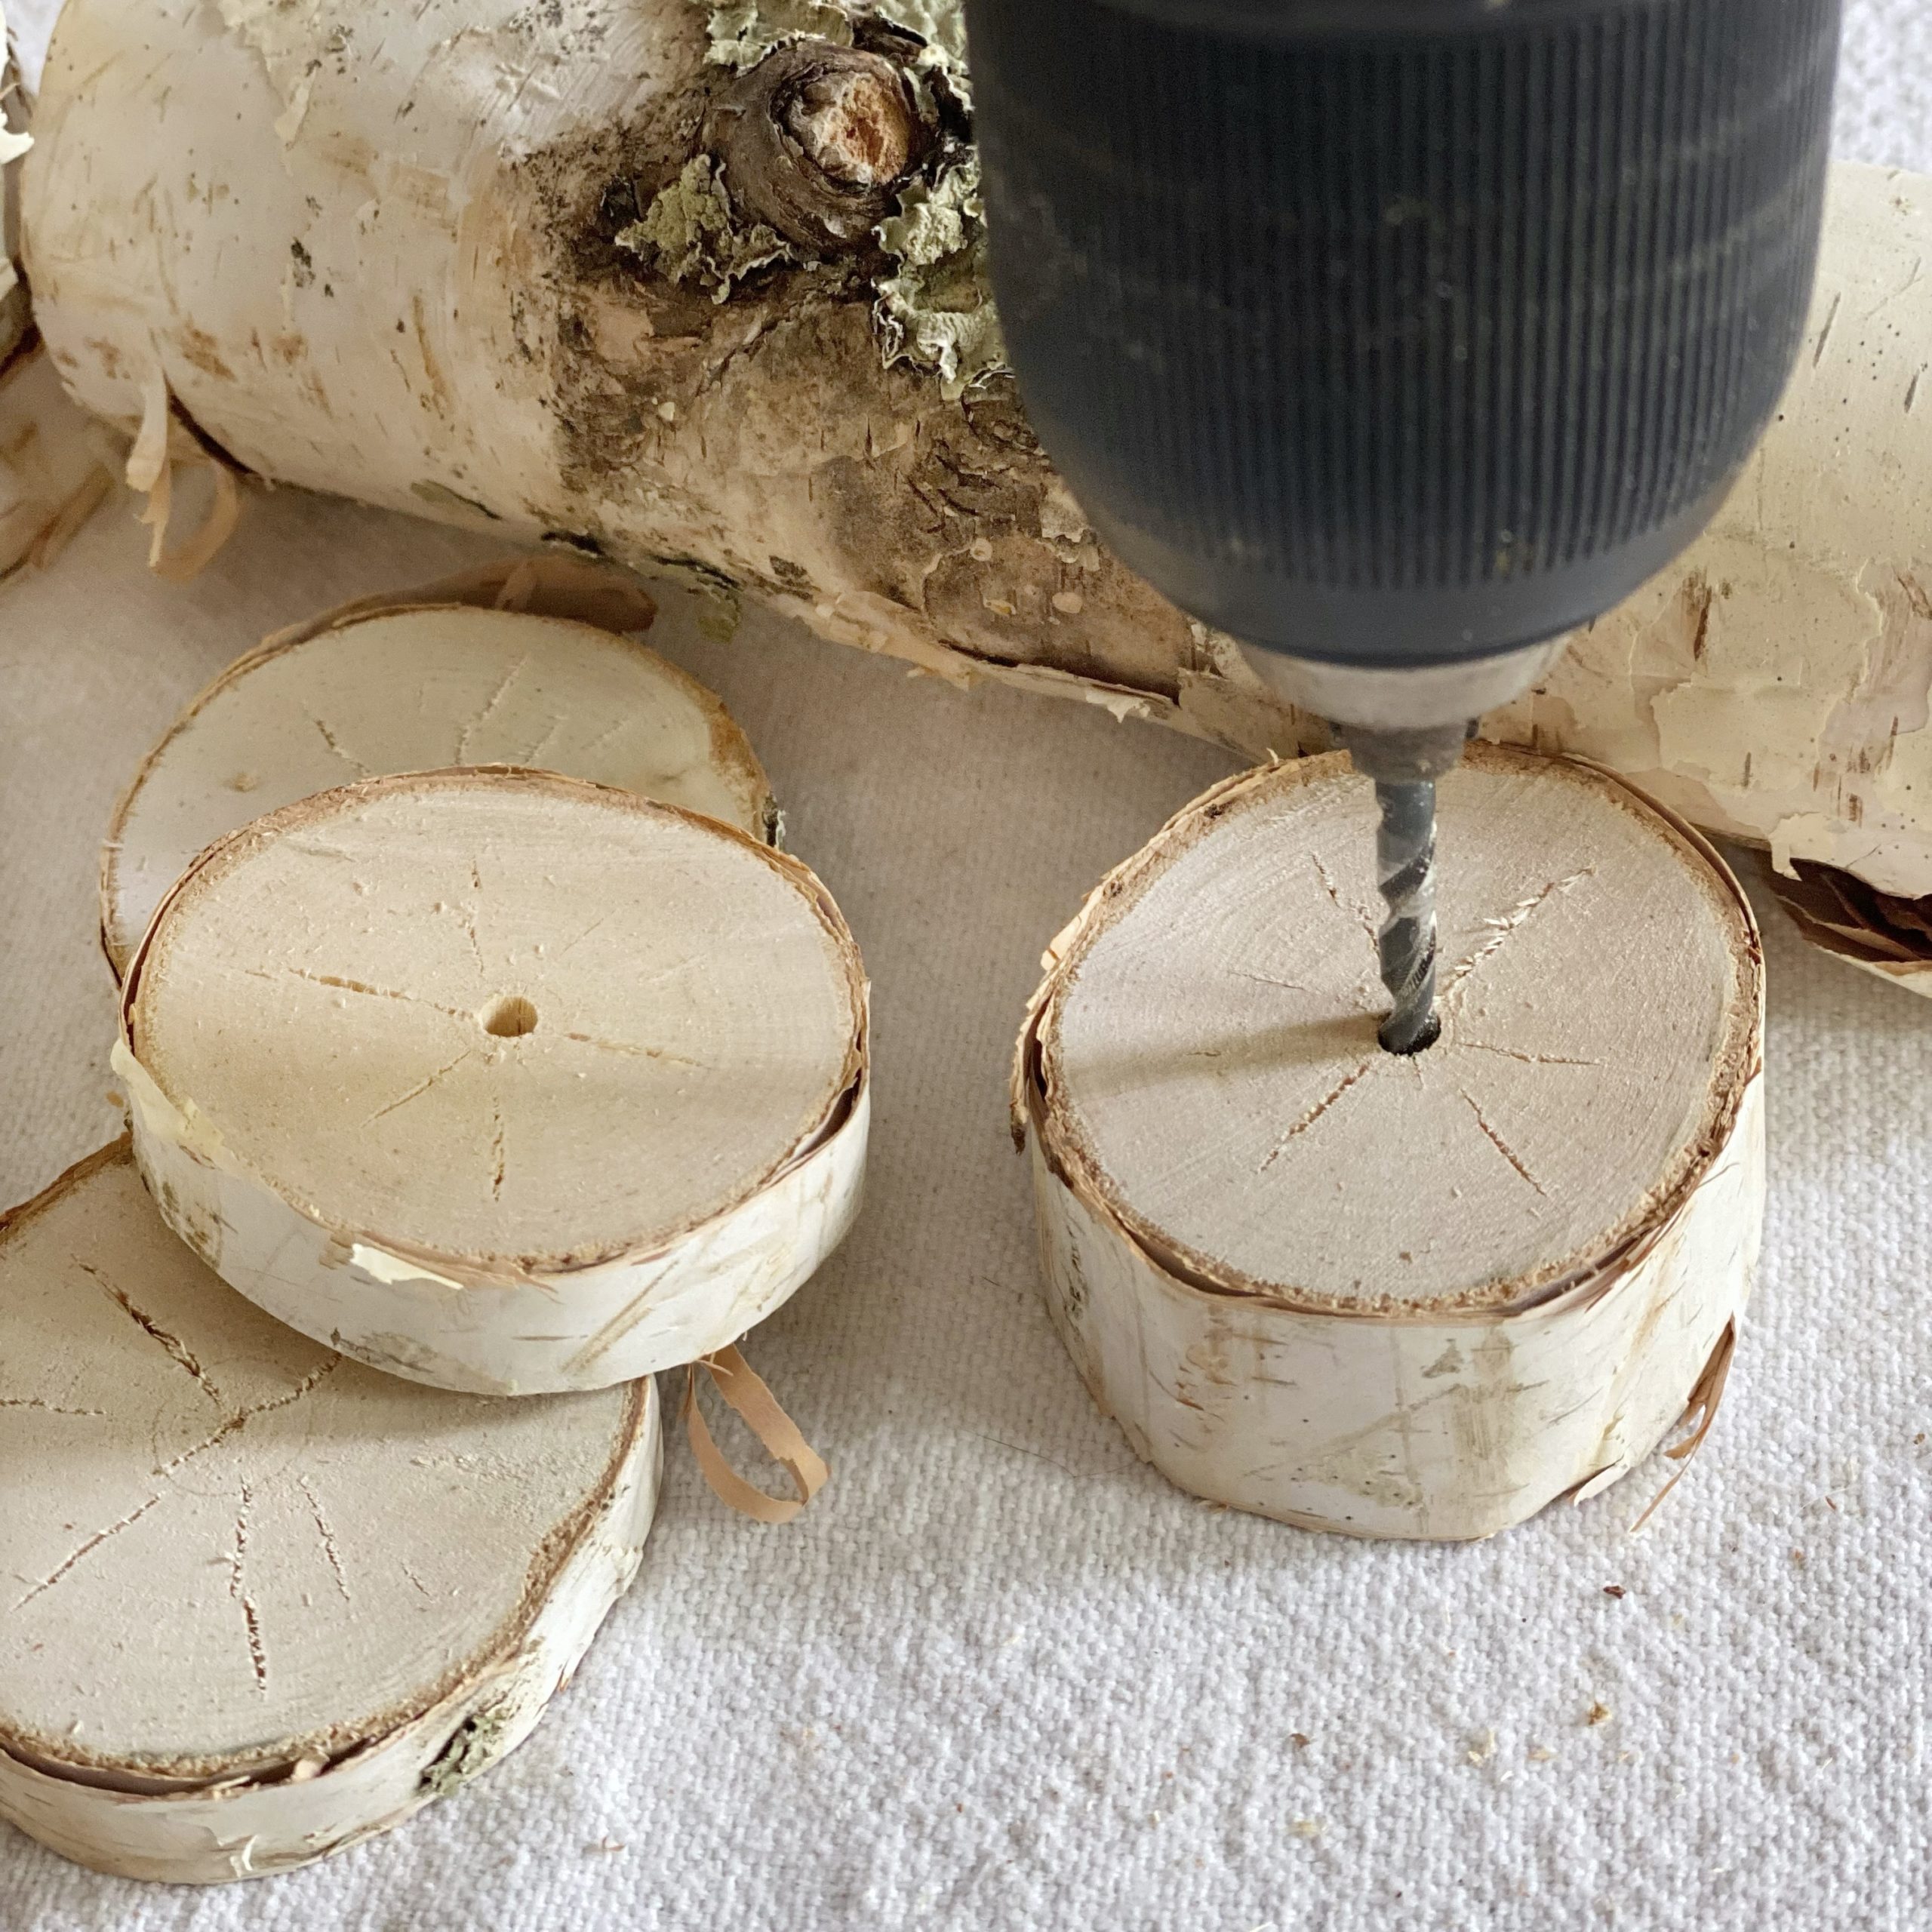 Drilling hole in the middle of the wood slice.